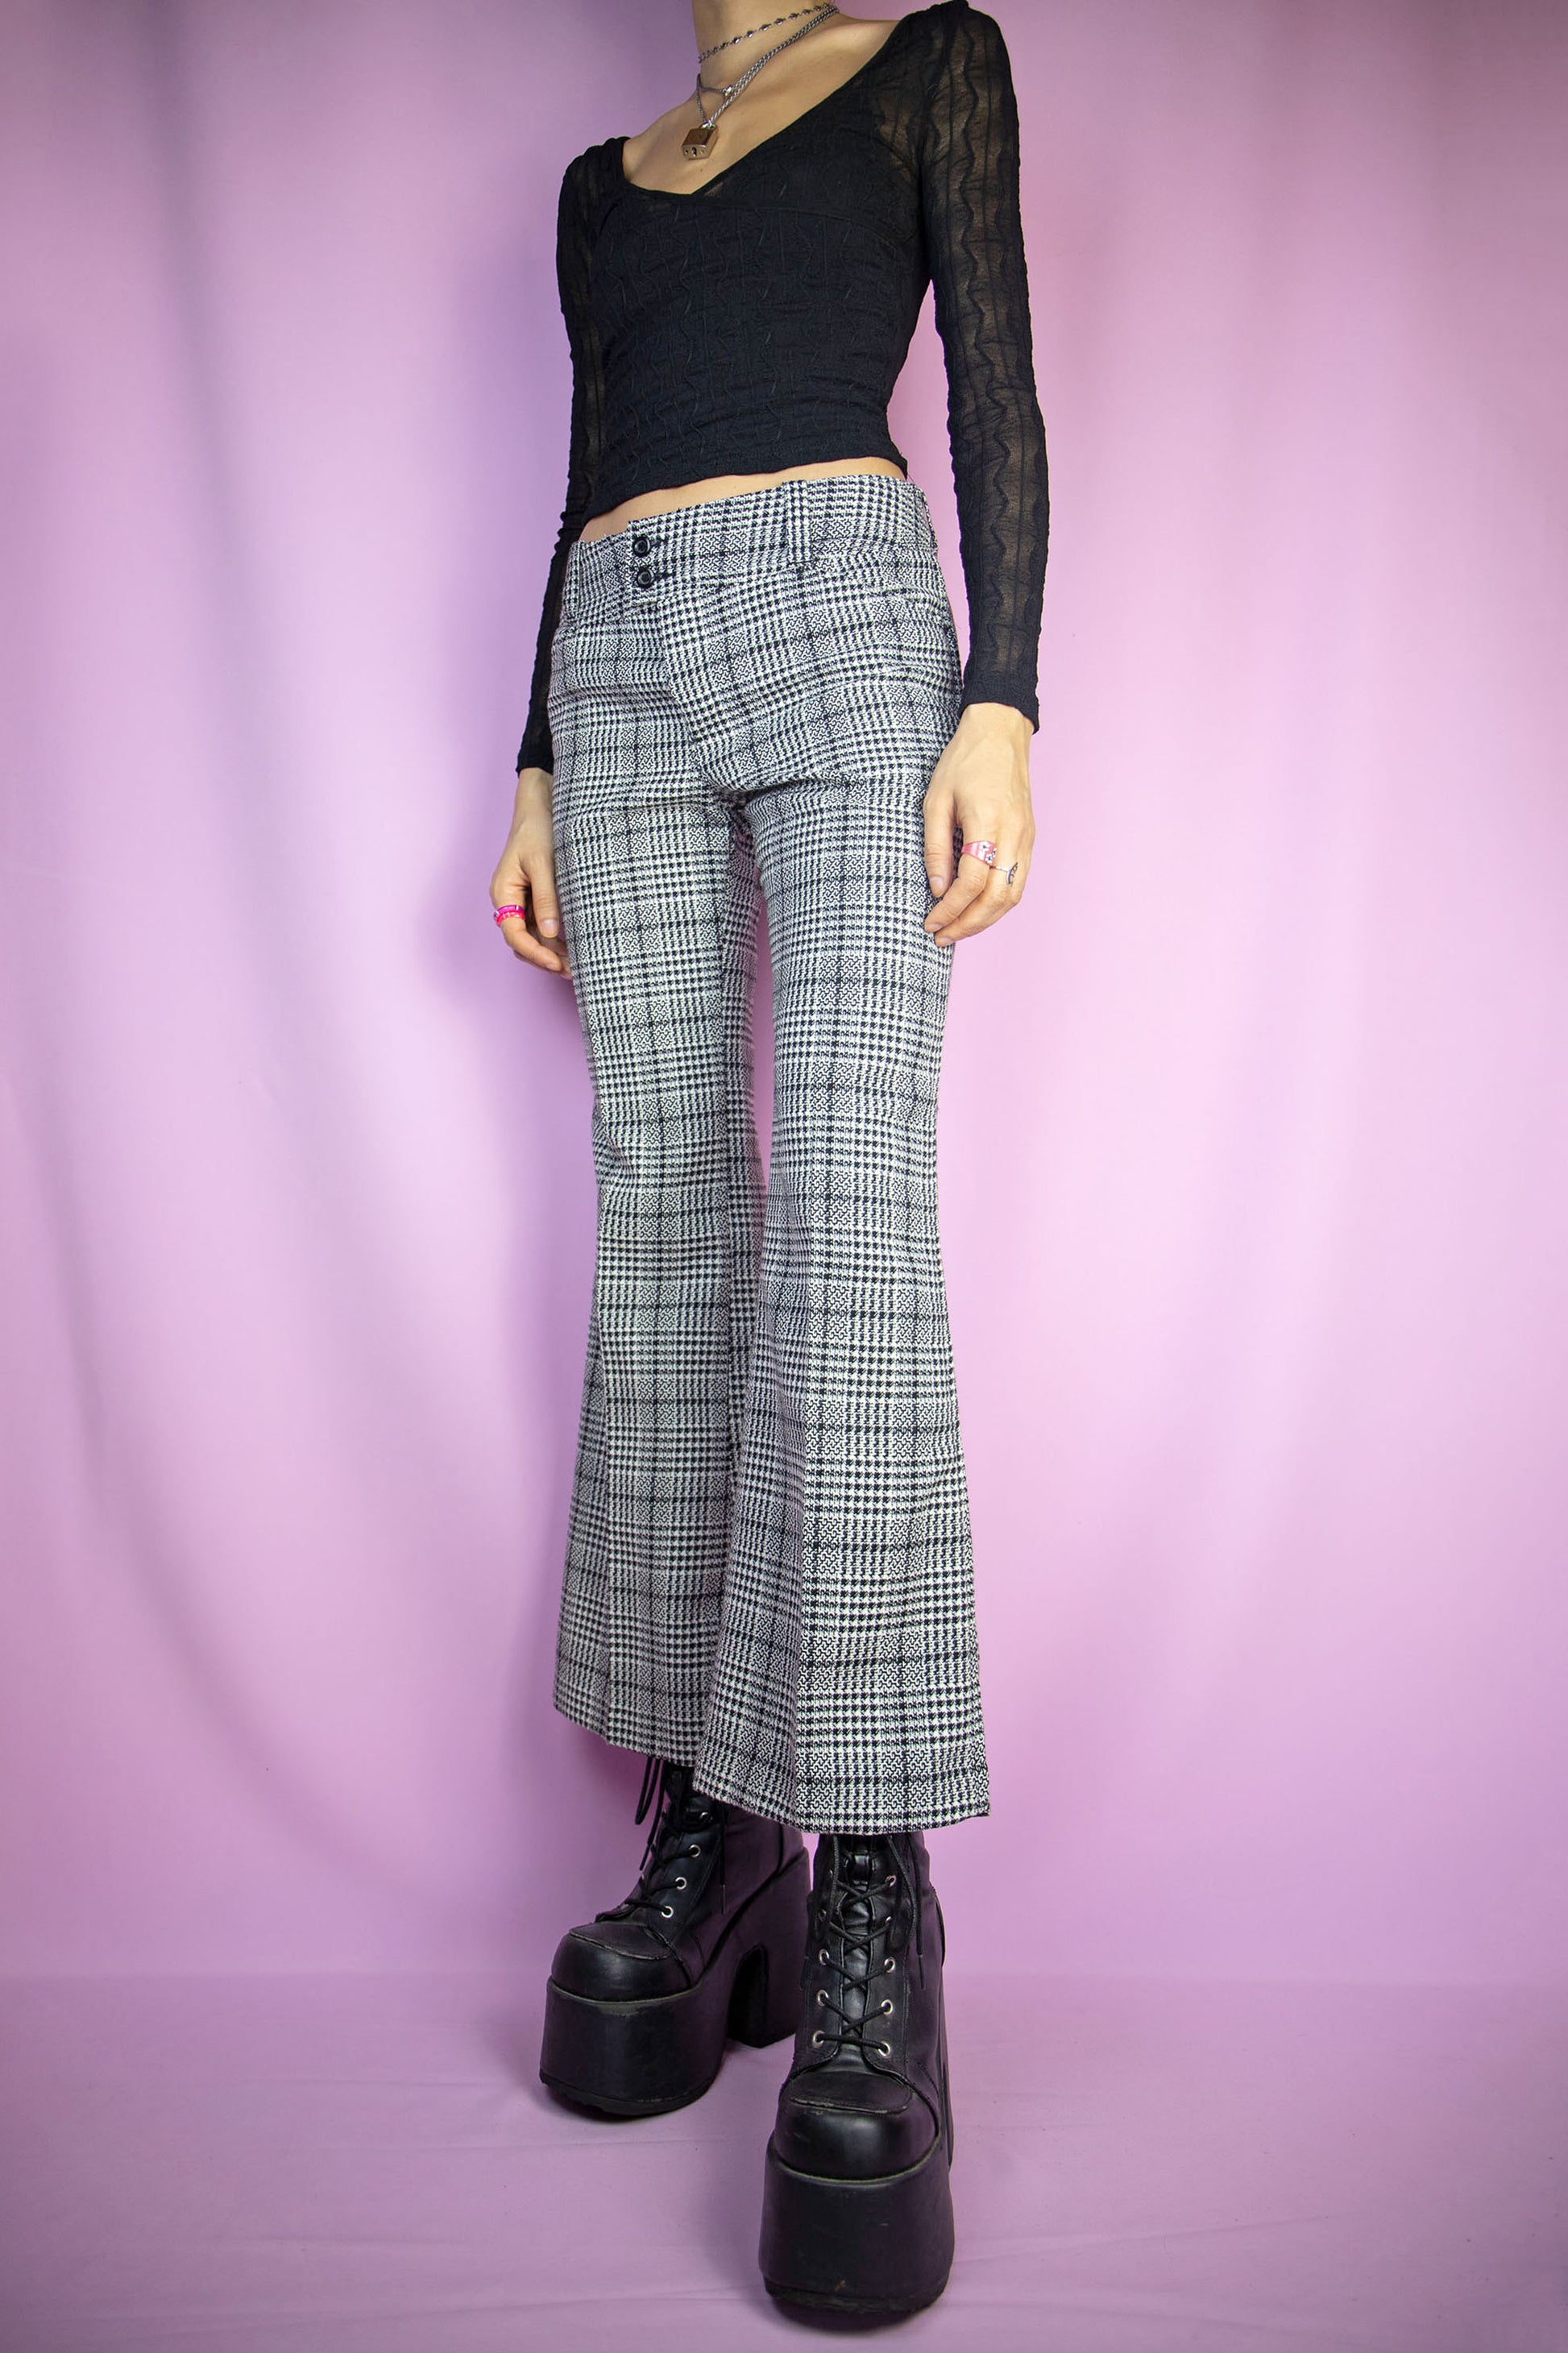 The Vintage 90s Plaid Flare Trousers are black and white checkered pattern pants with pockets, and a front zipper closure. Preppy office 1990s gingham knit tailored pants.